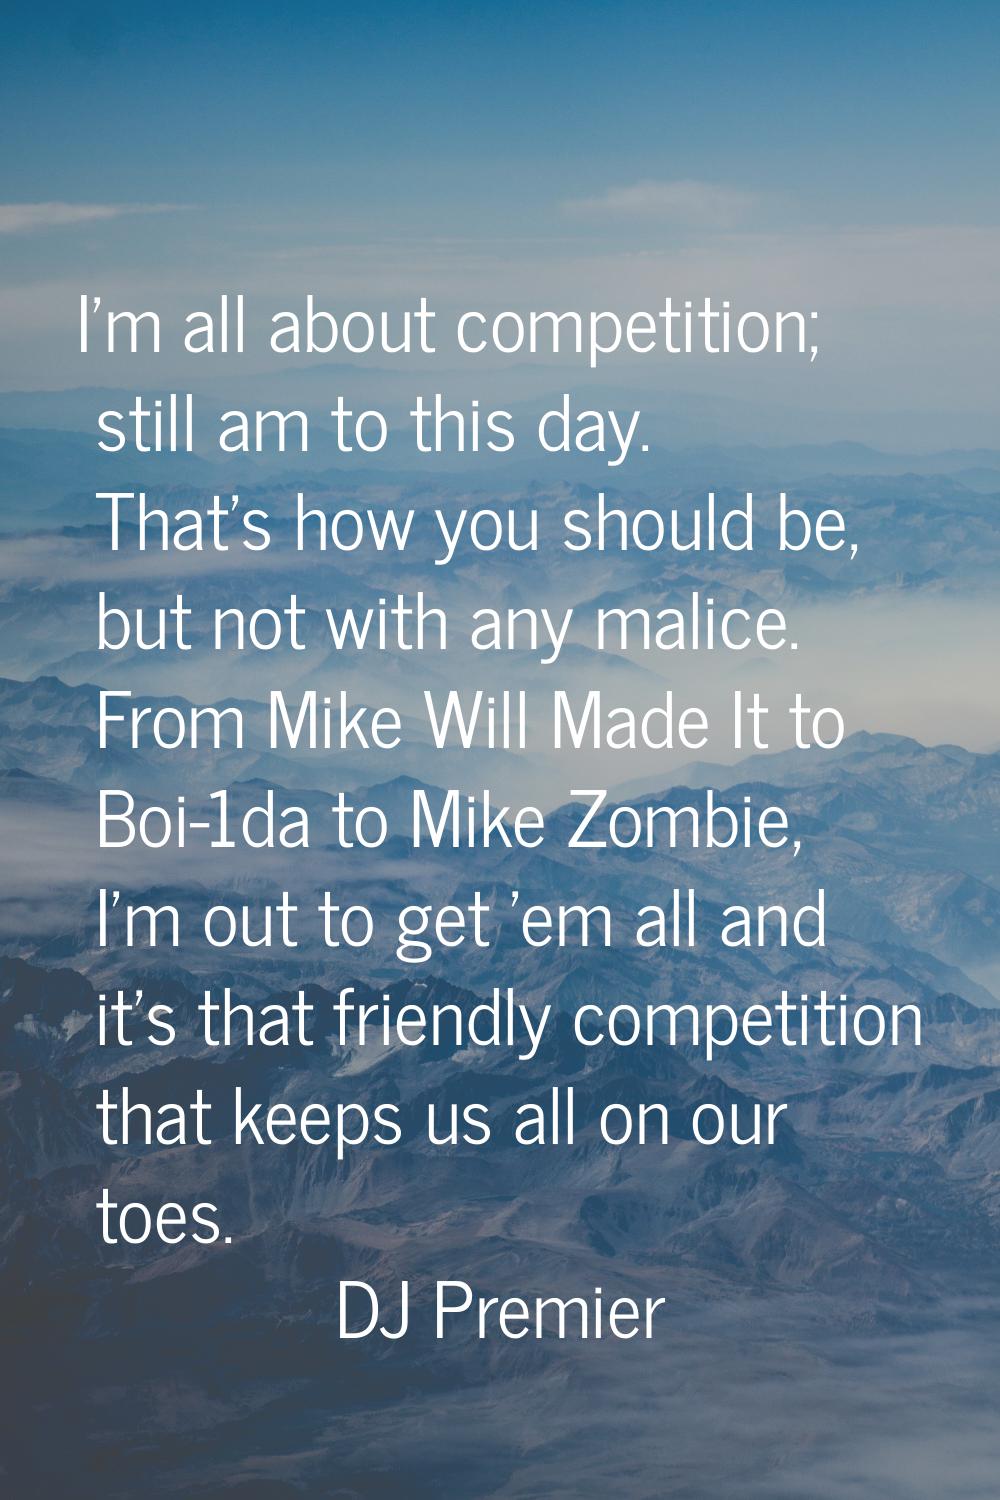 I'm all about competition; still am to this day. That's how you should be, but not with any malice.